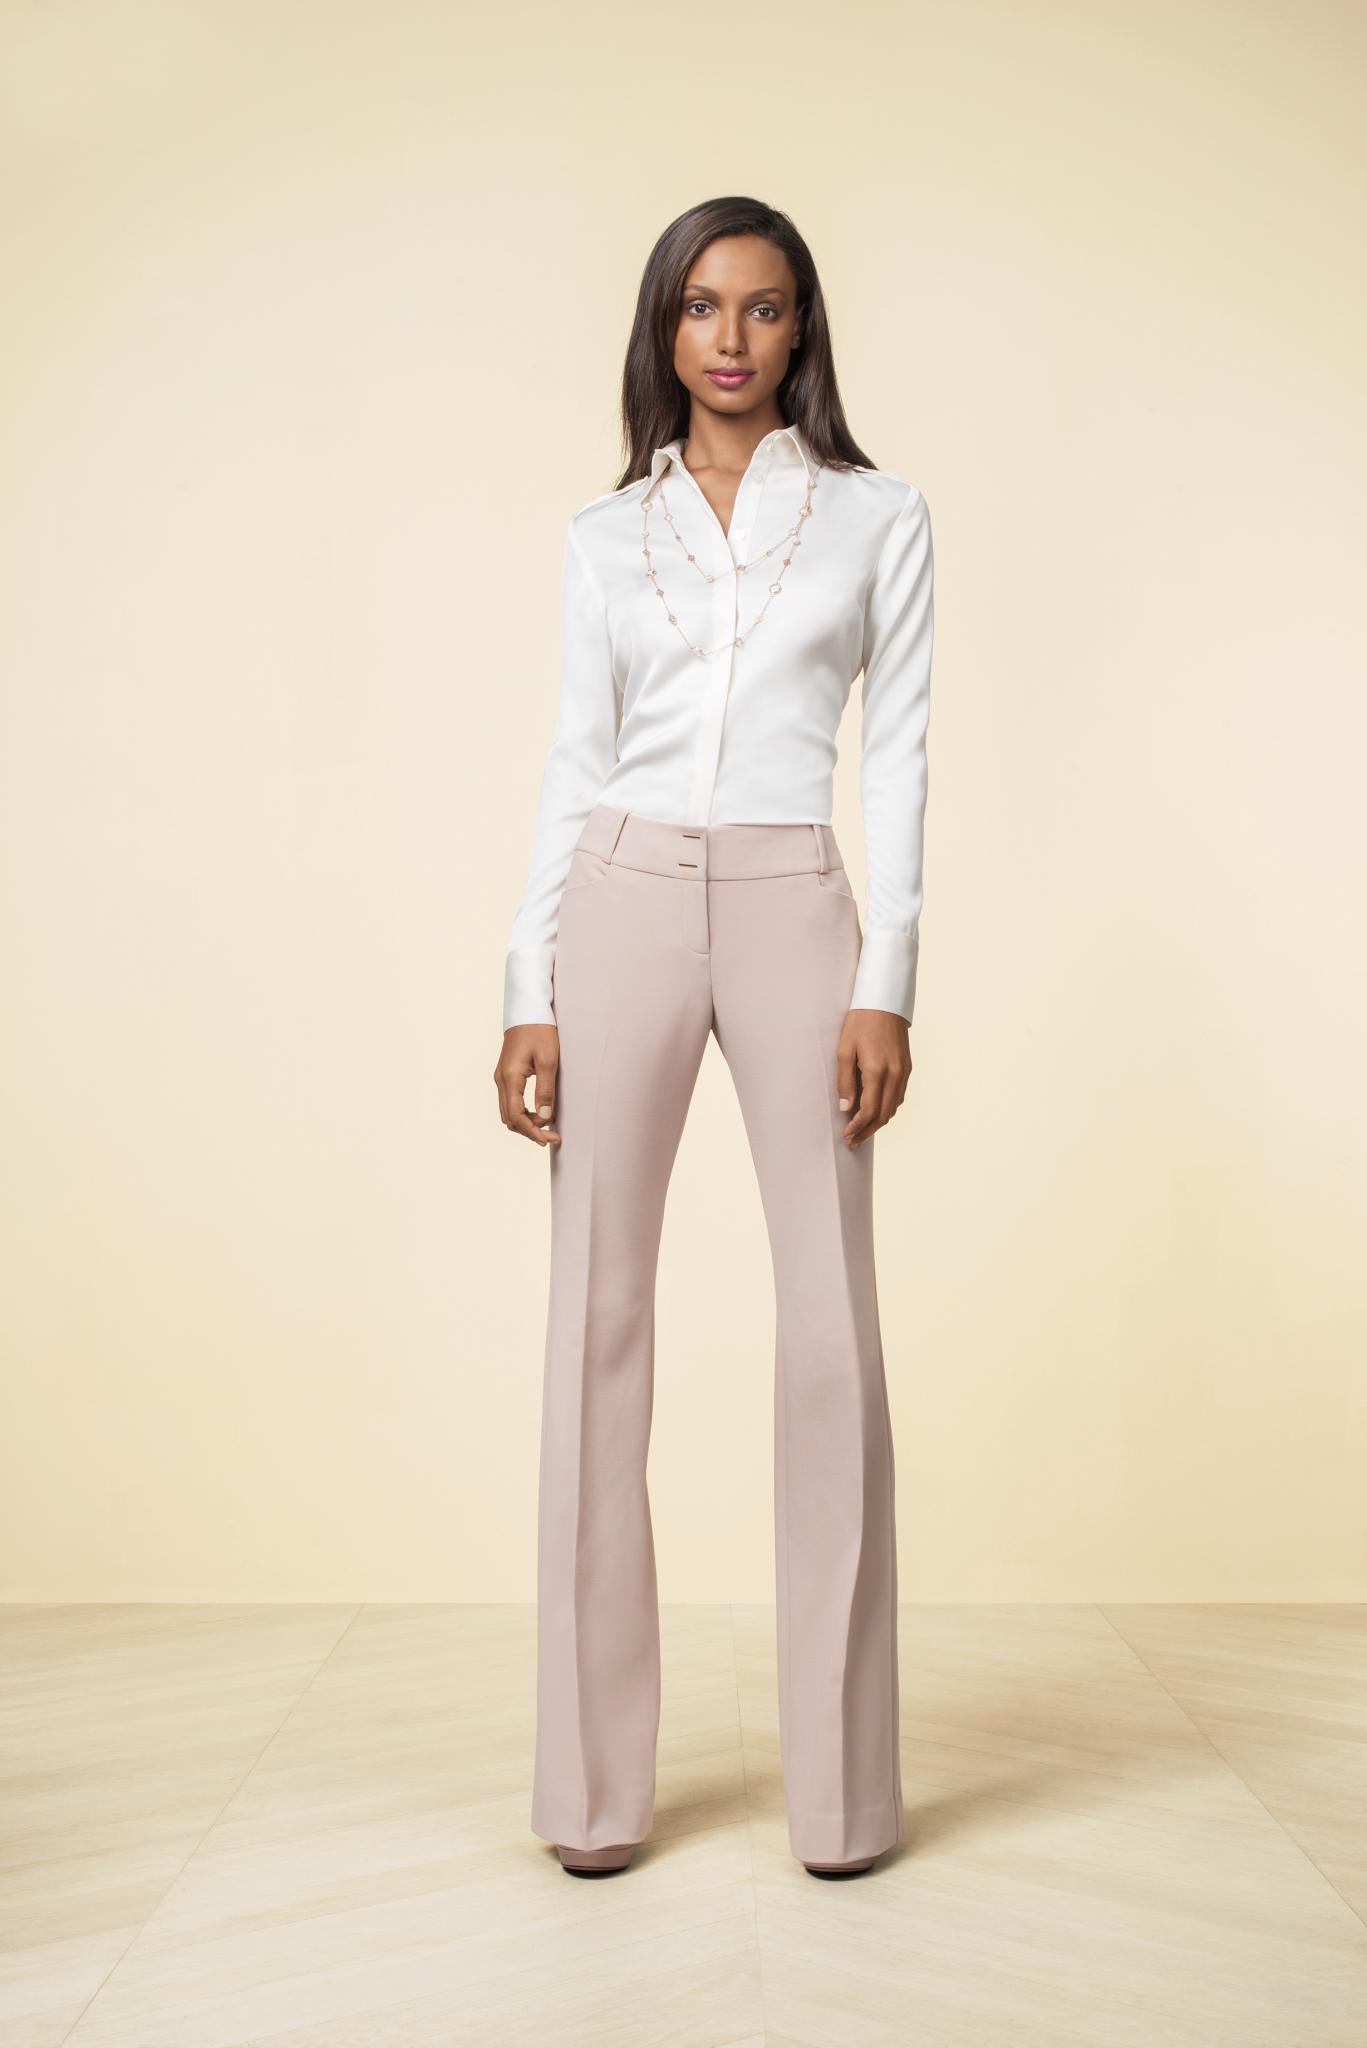 The Limited's Olivia Pope Inspired Collection